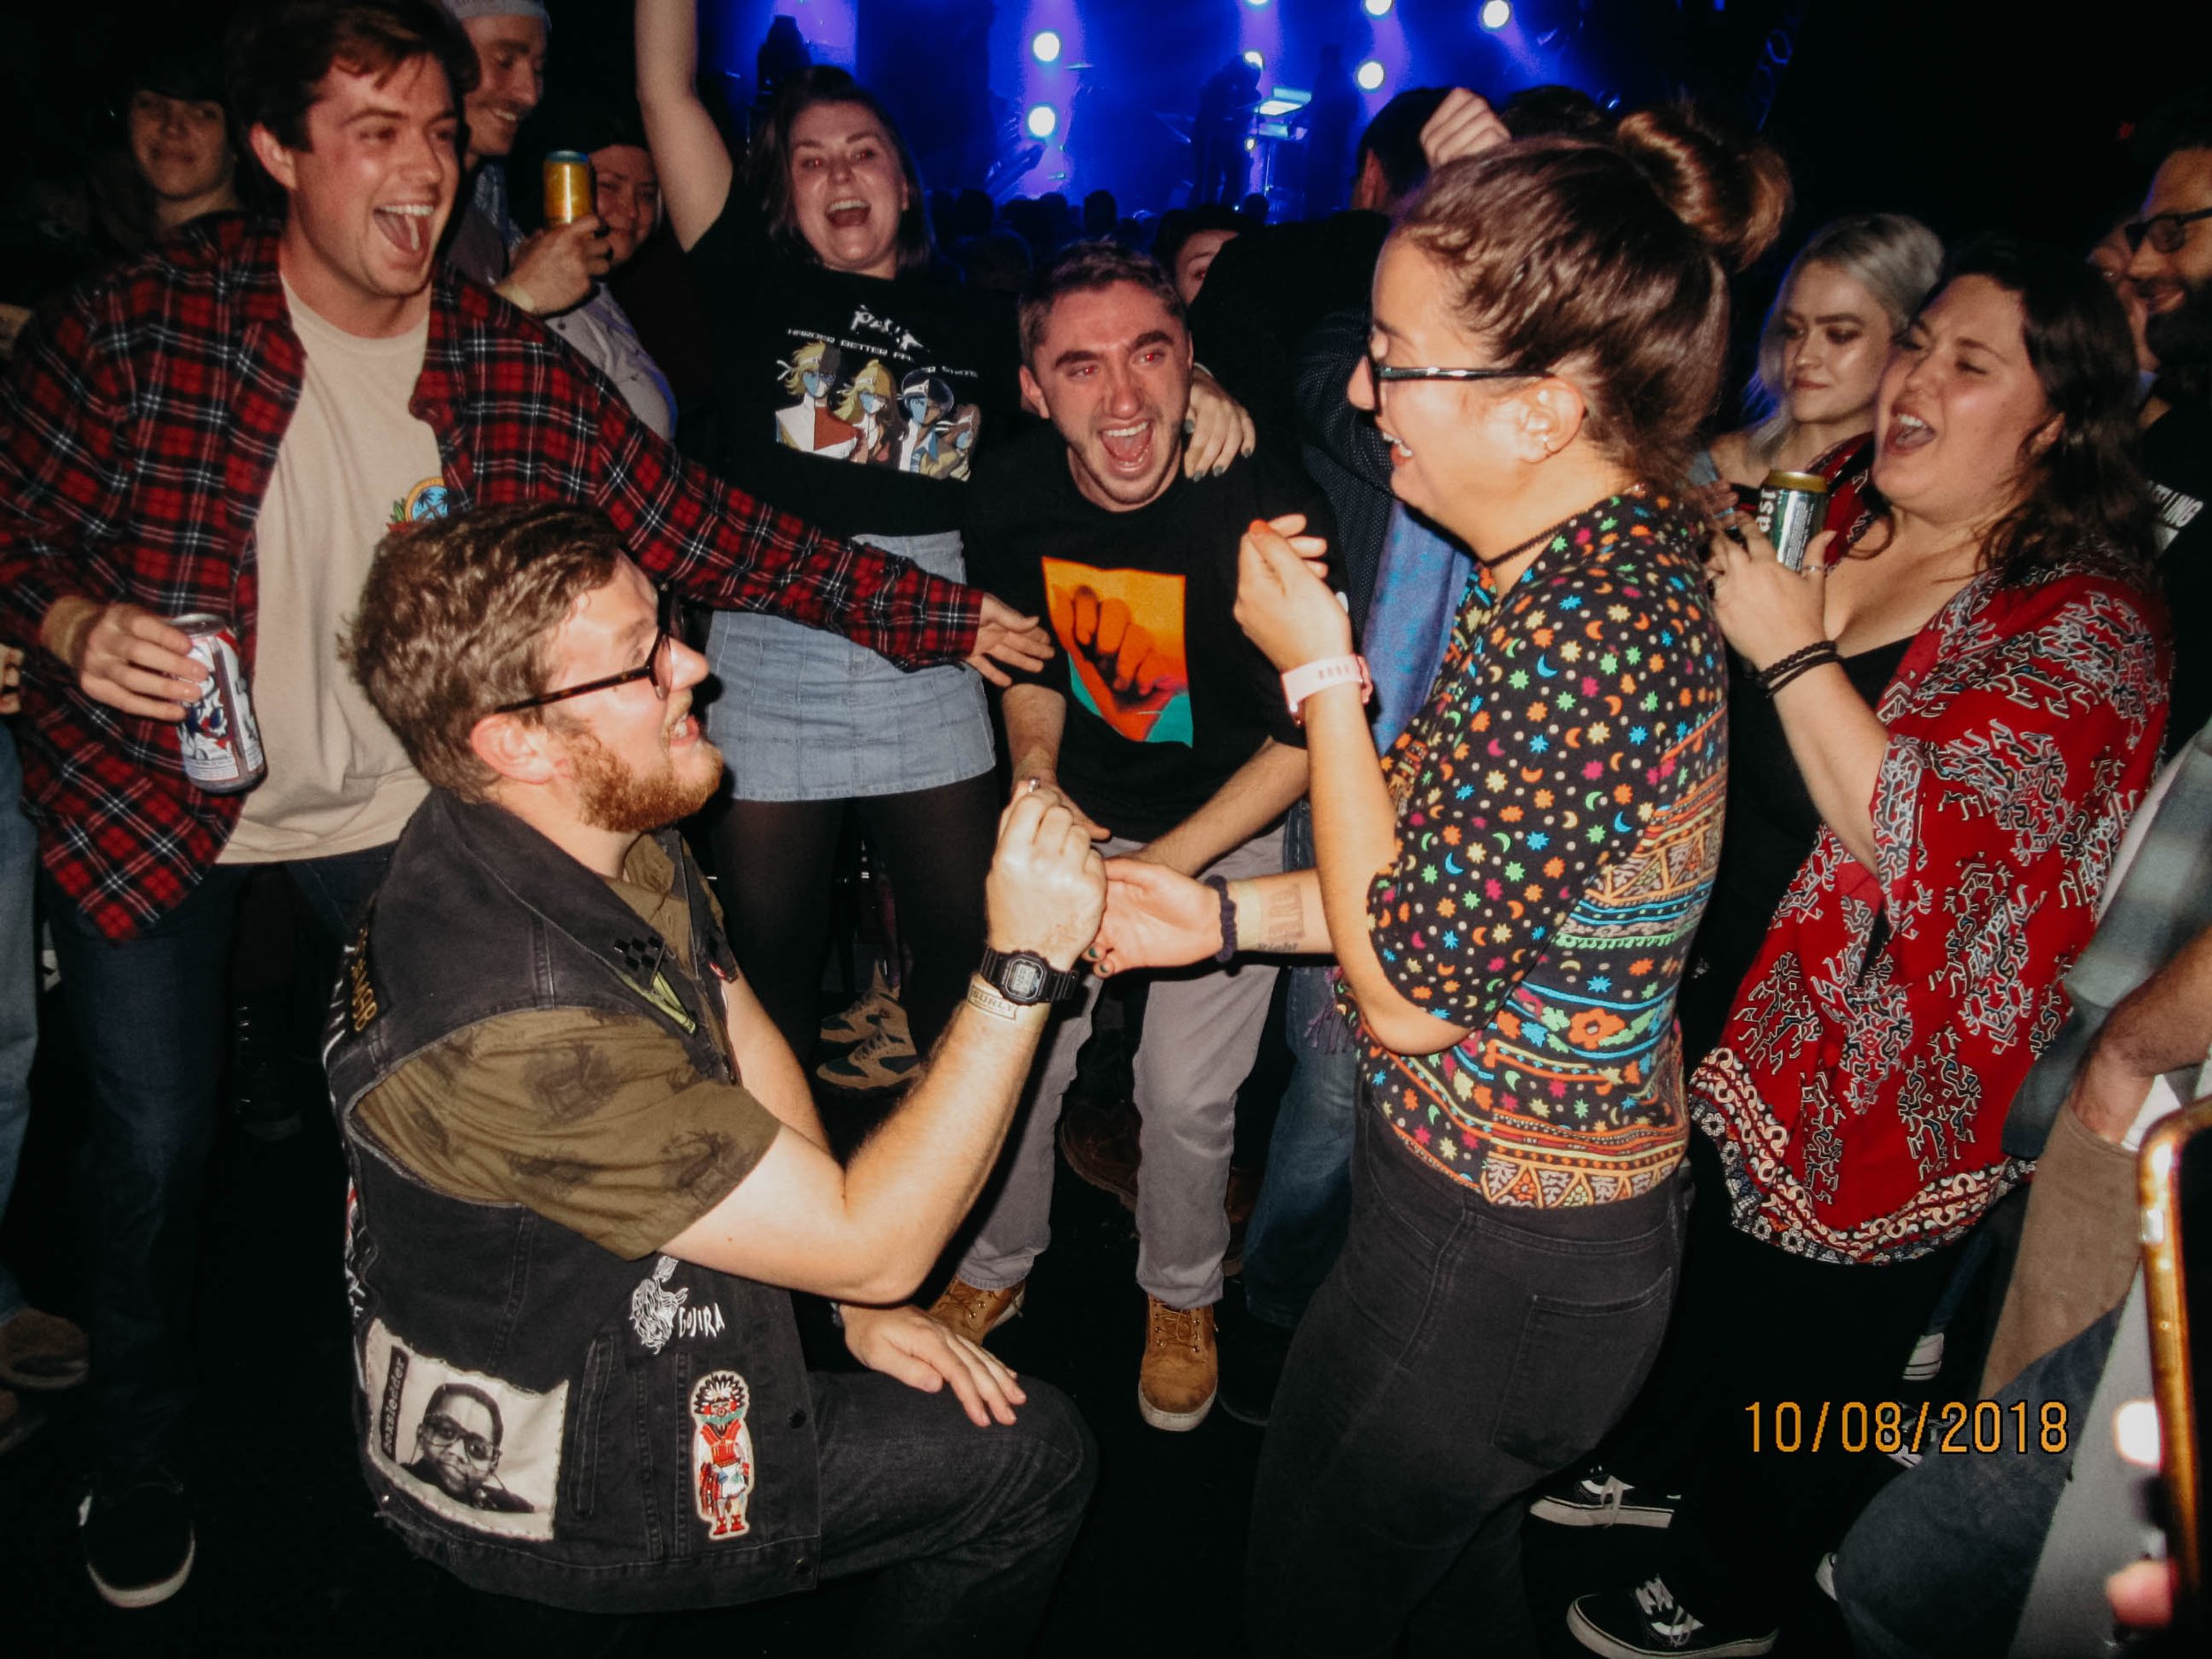 Engagement shoot at the Glitch Mob concert, Minnesota, 2019